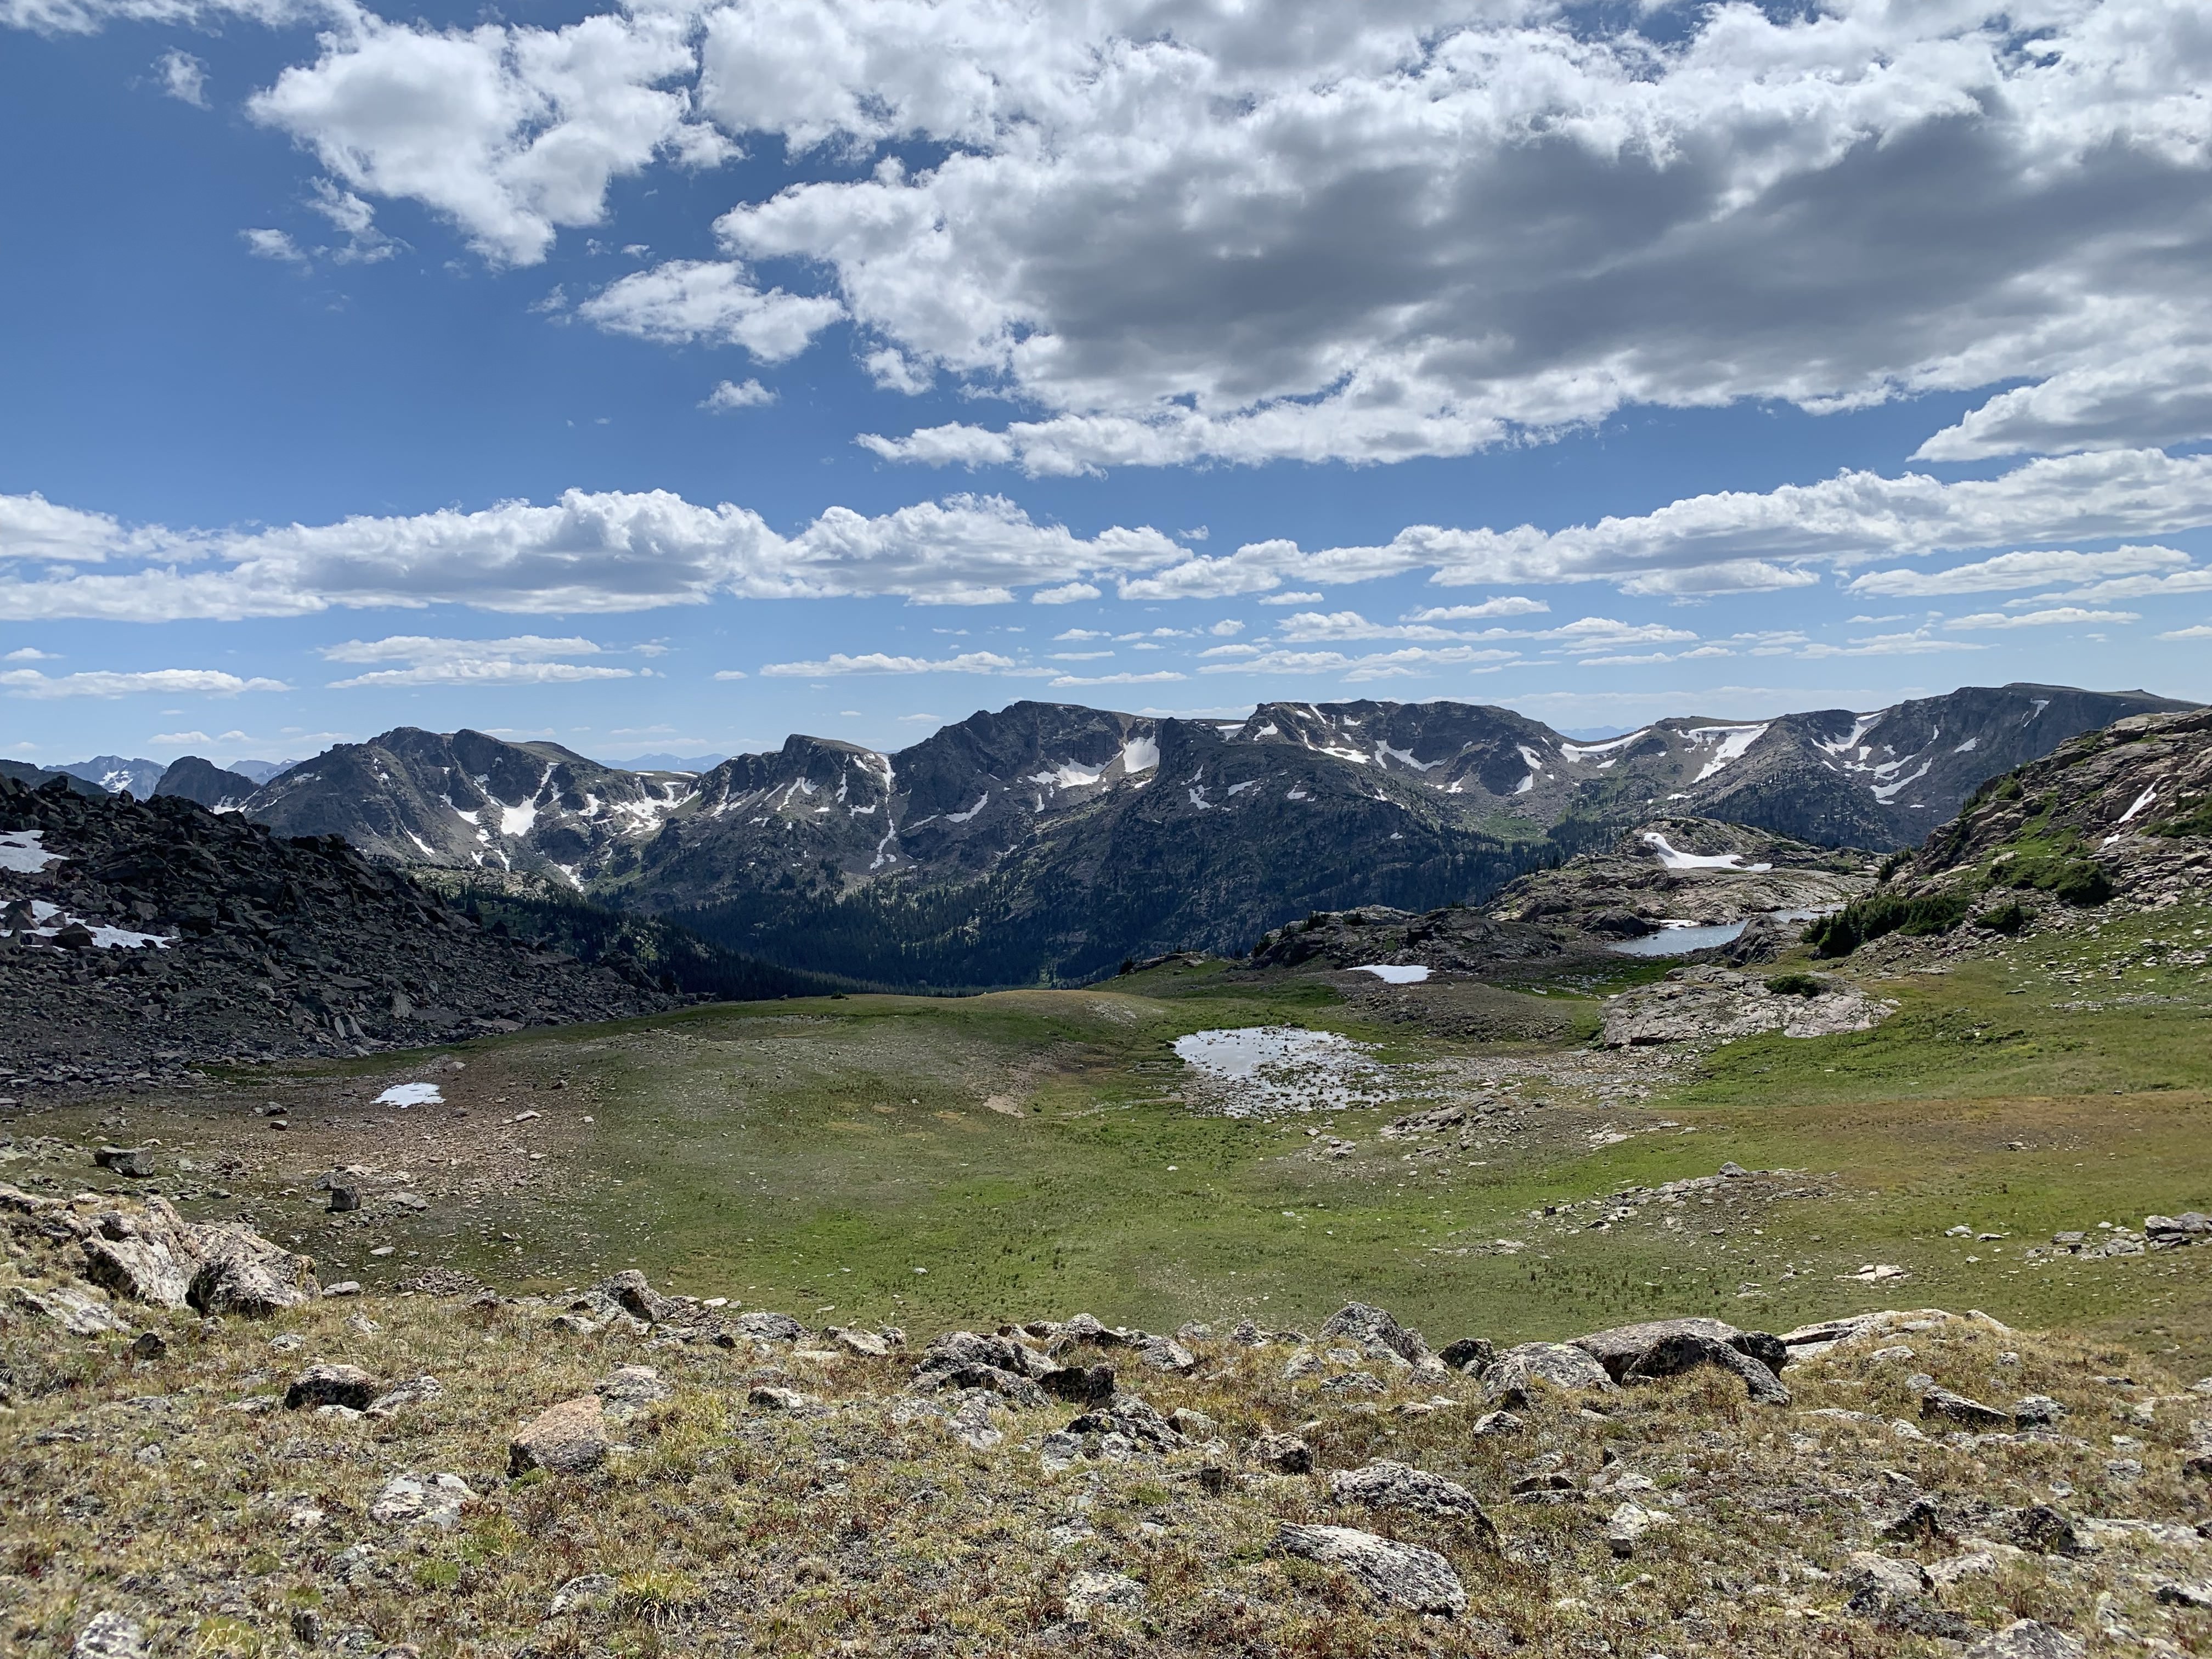 Looking into Paradise Park from Isolation Peak Pass